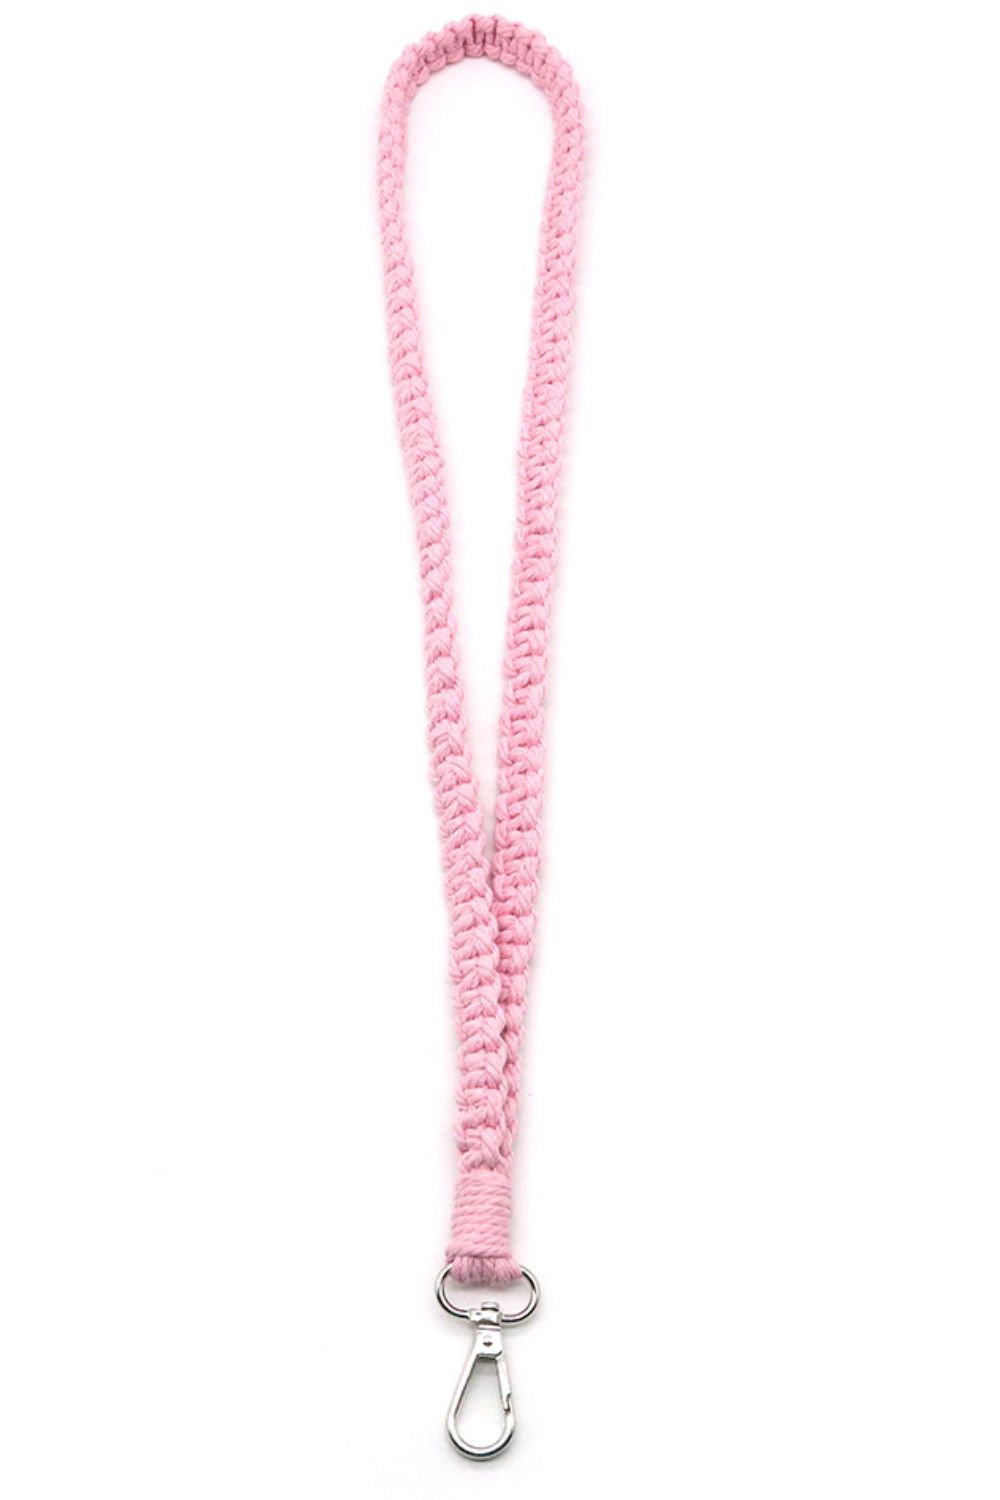 Misty Rose Assorted 2-Pack Hand-Woven Lanyard Keychain Sentient Beauty Fashions Apparel &amp; Accessories